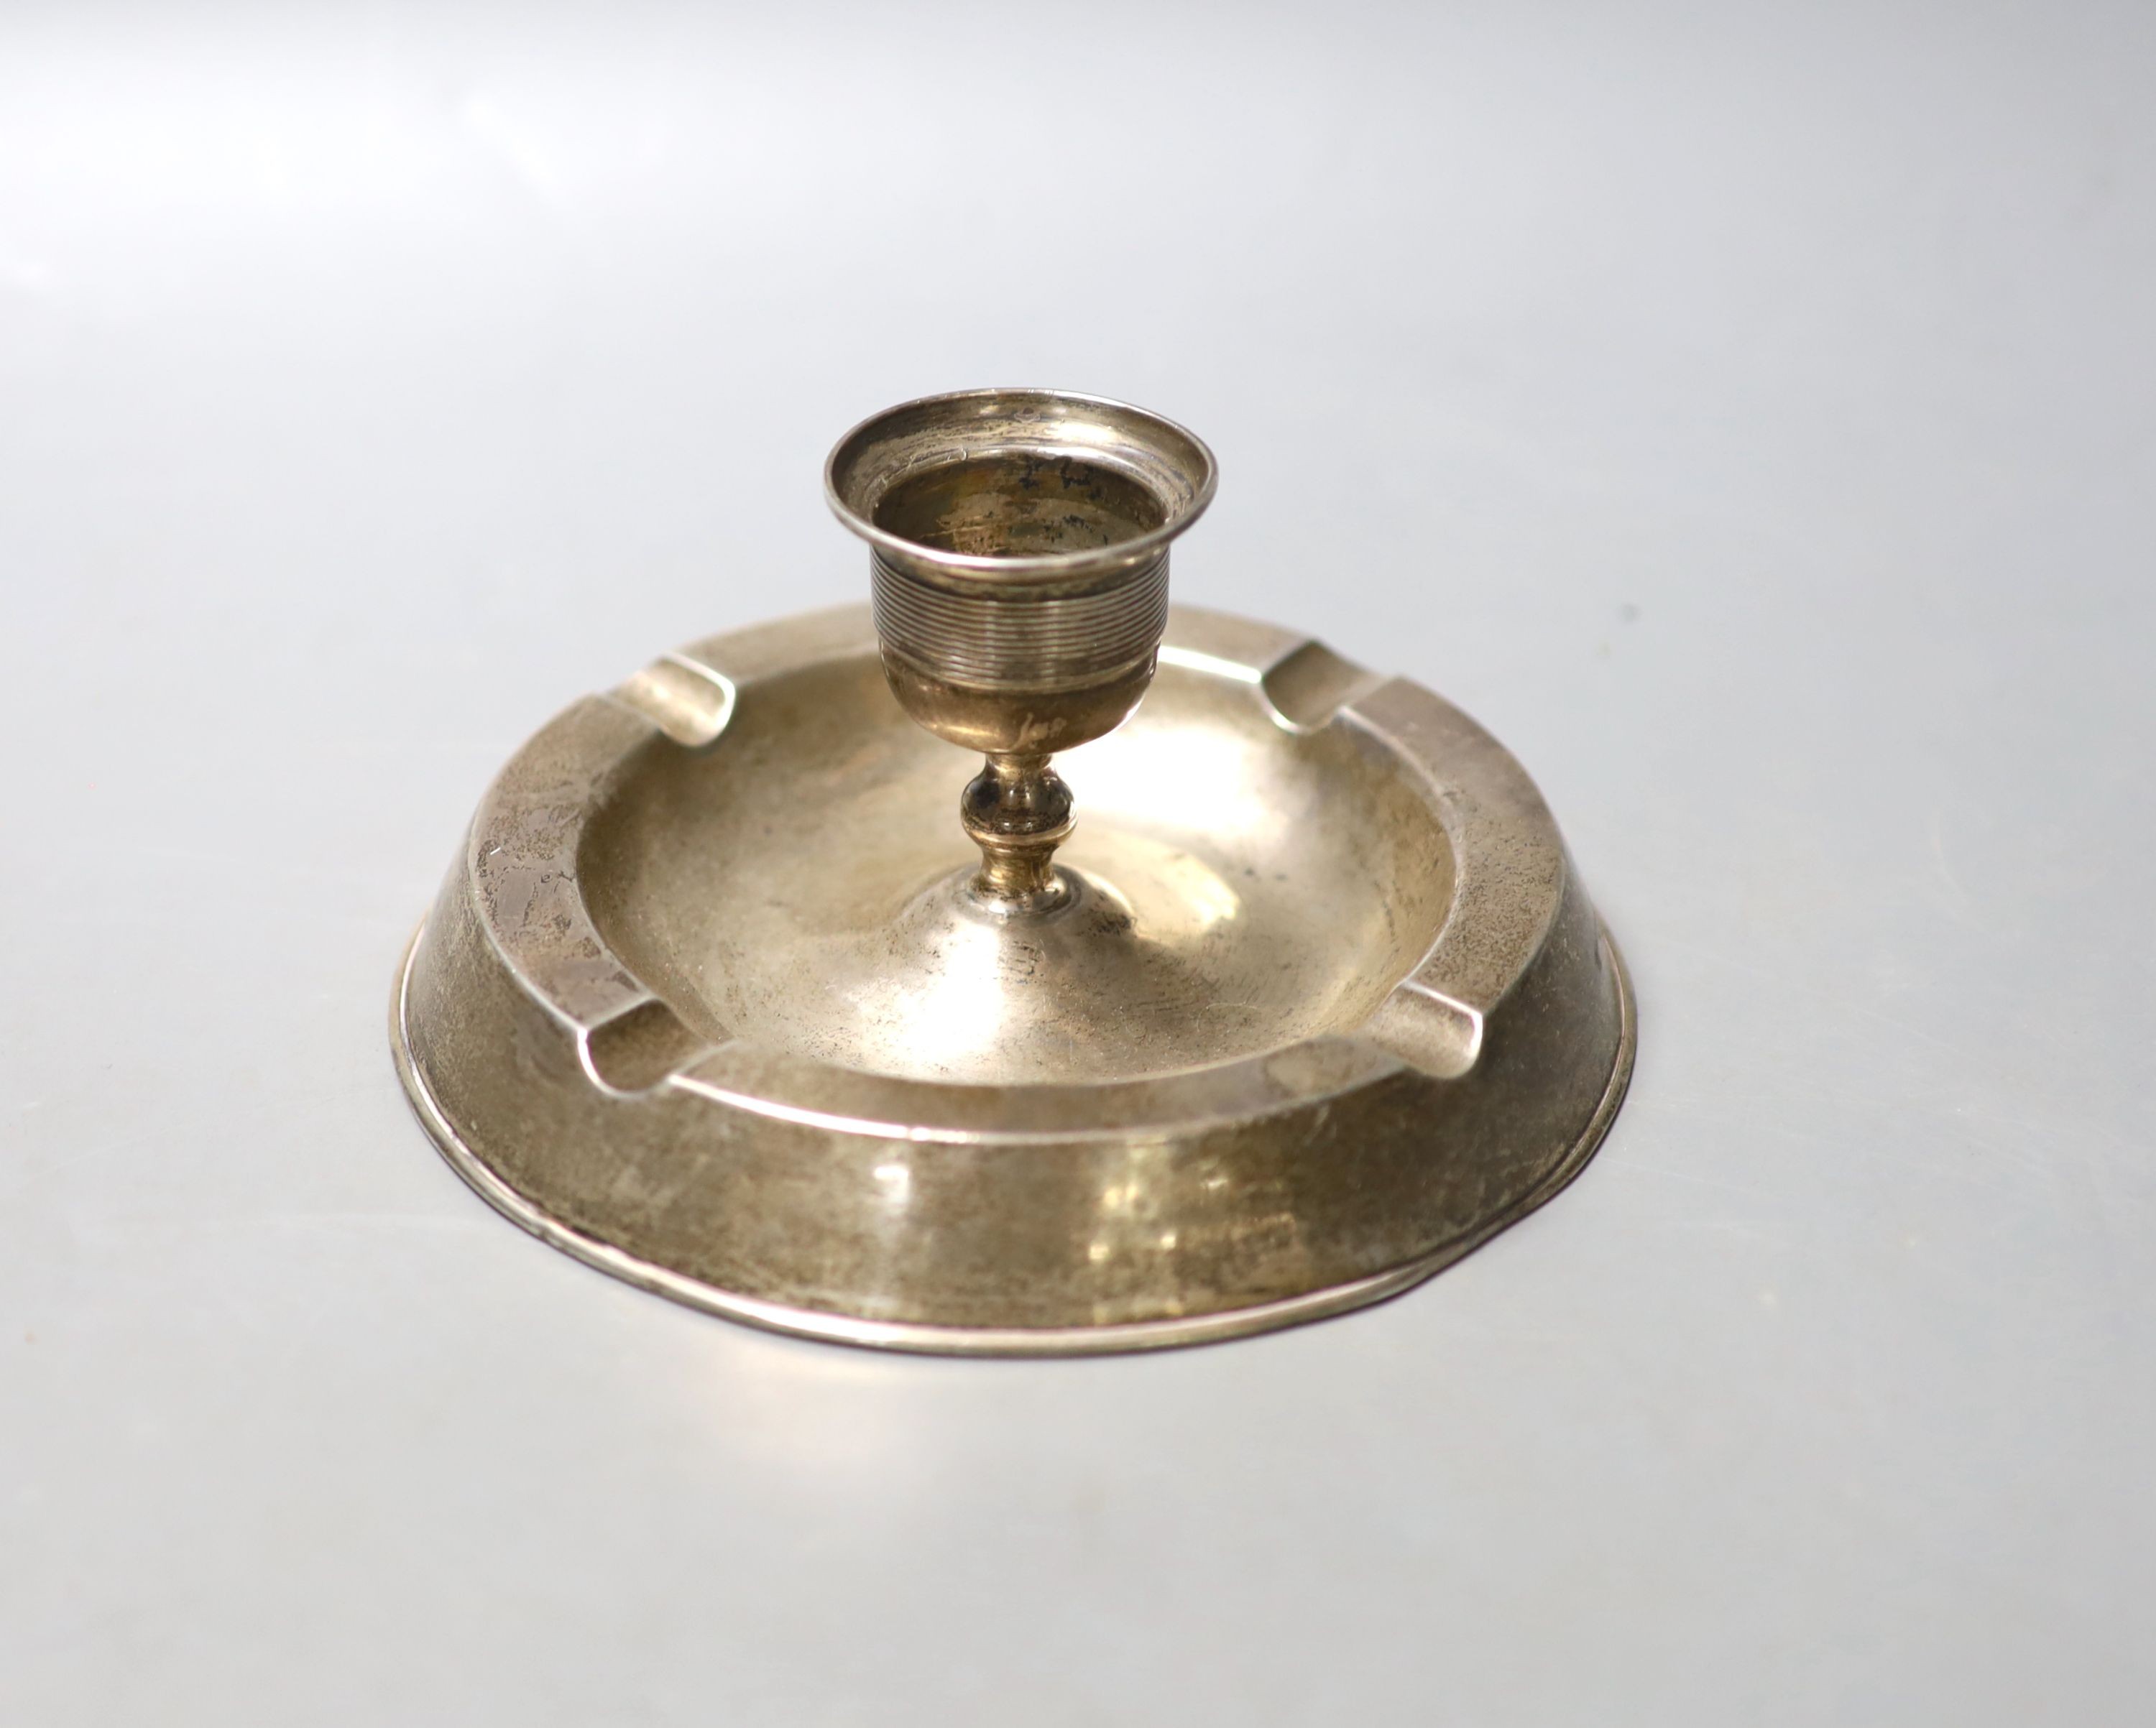 An Edwardian silver mounted combination ashtray/candlestick, Birmingham, 1908, diameter 14.4cm, weighted.